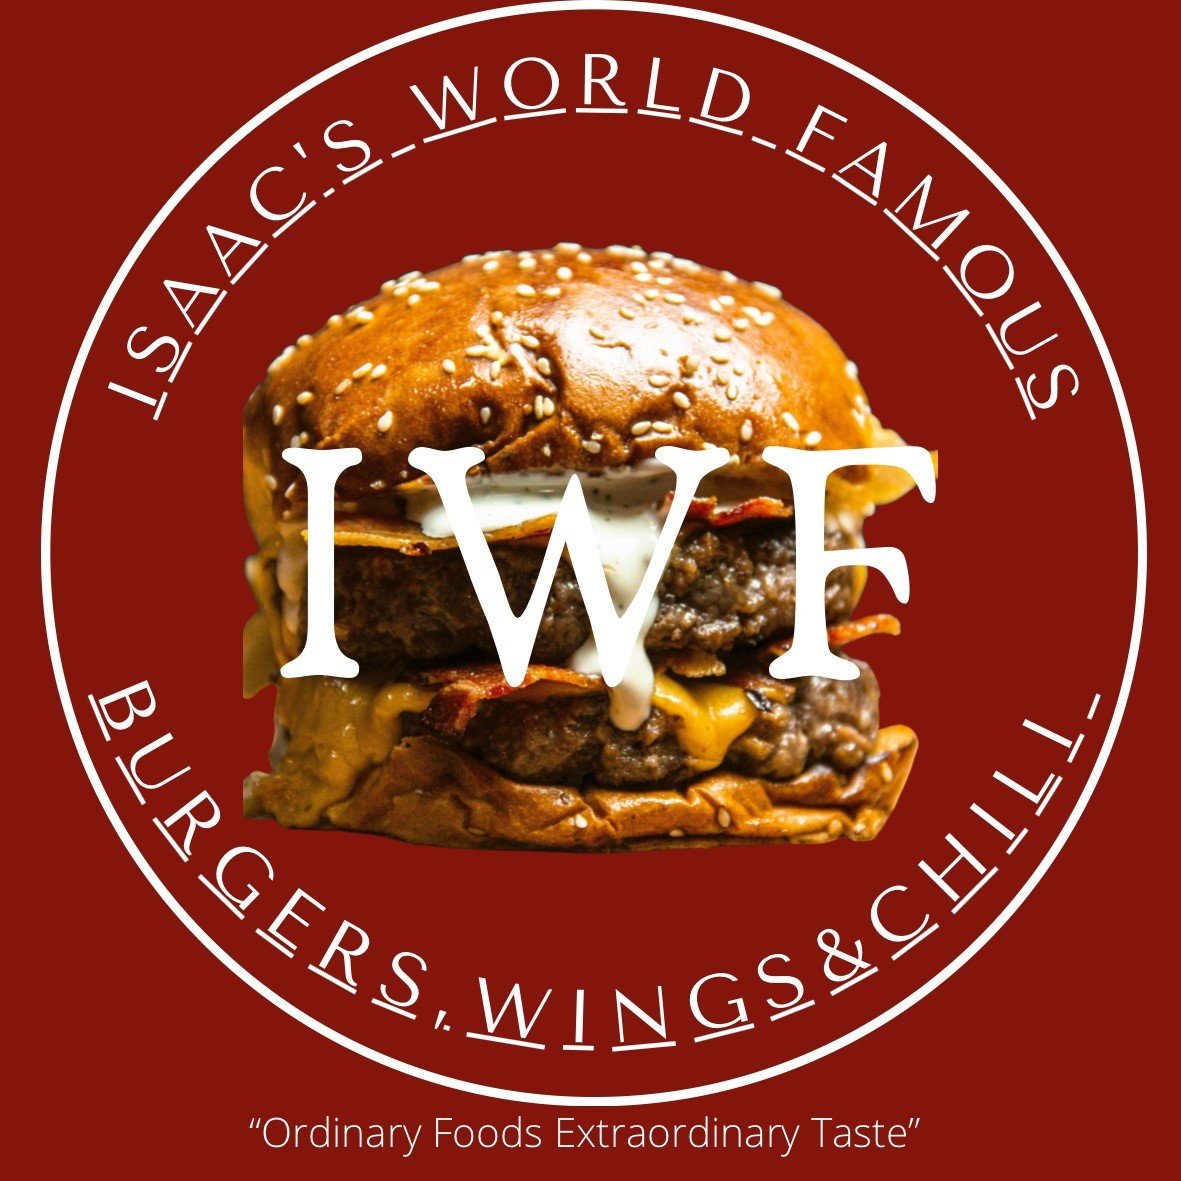 Isaac's World Famous Burgers